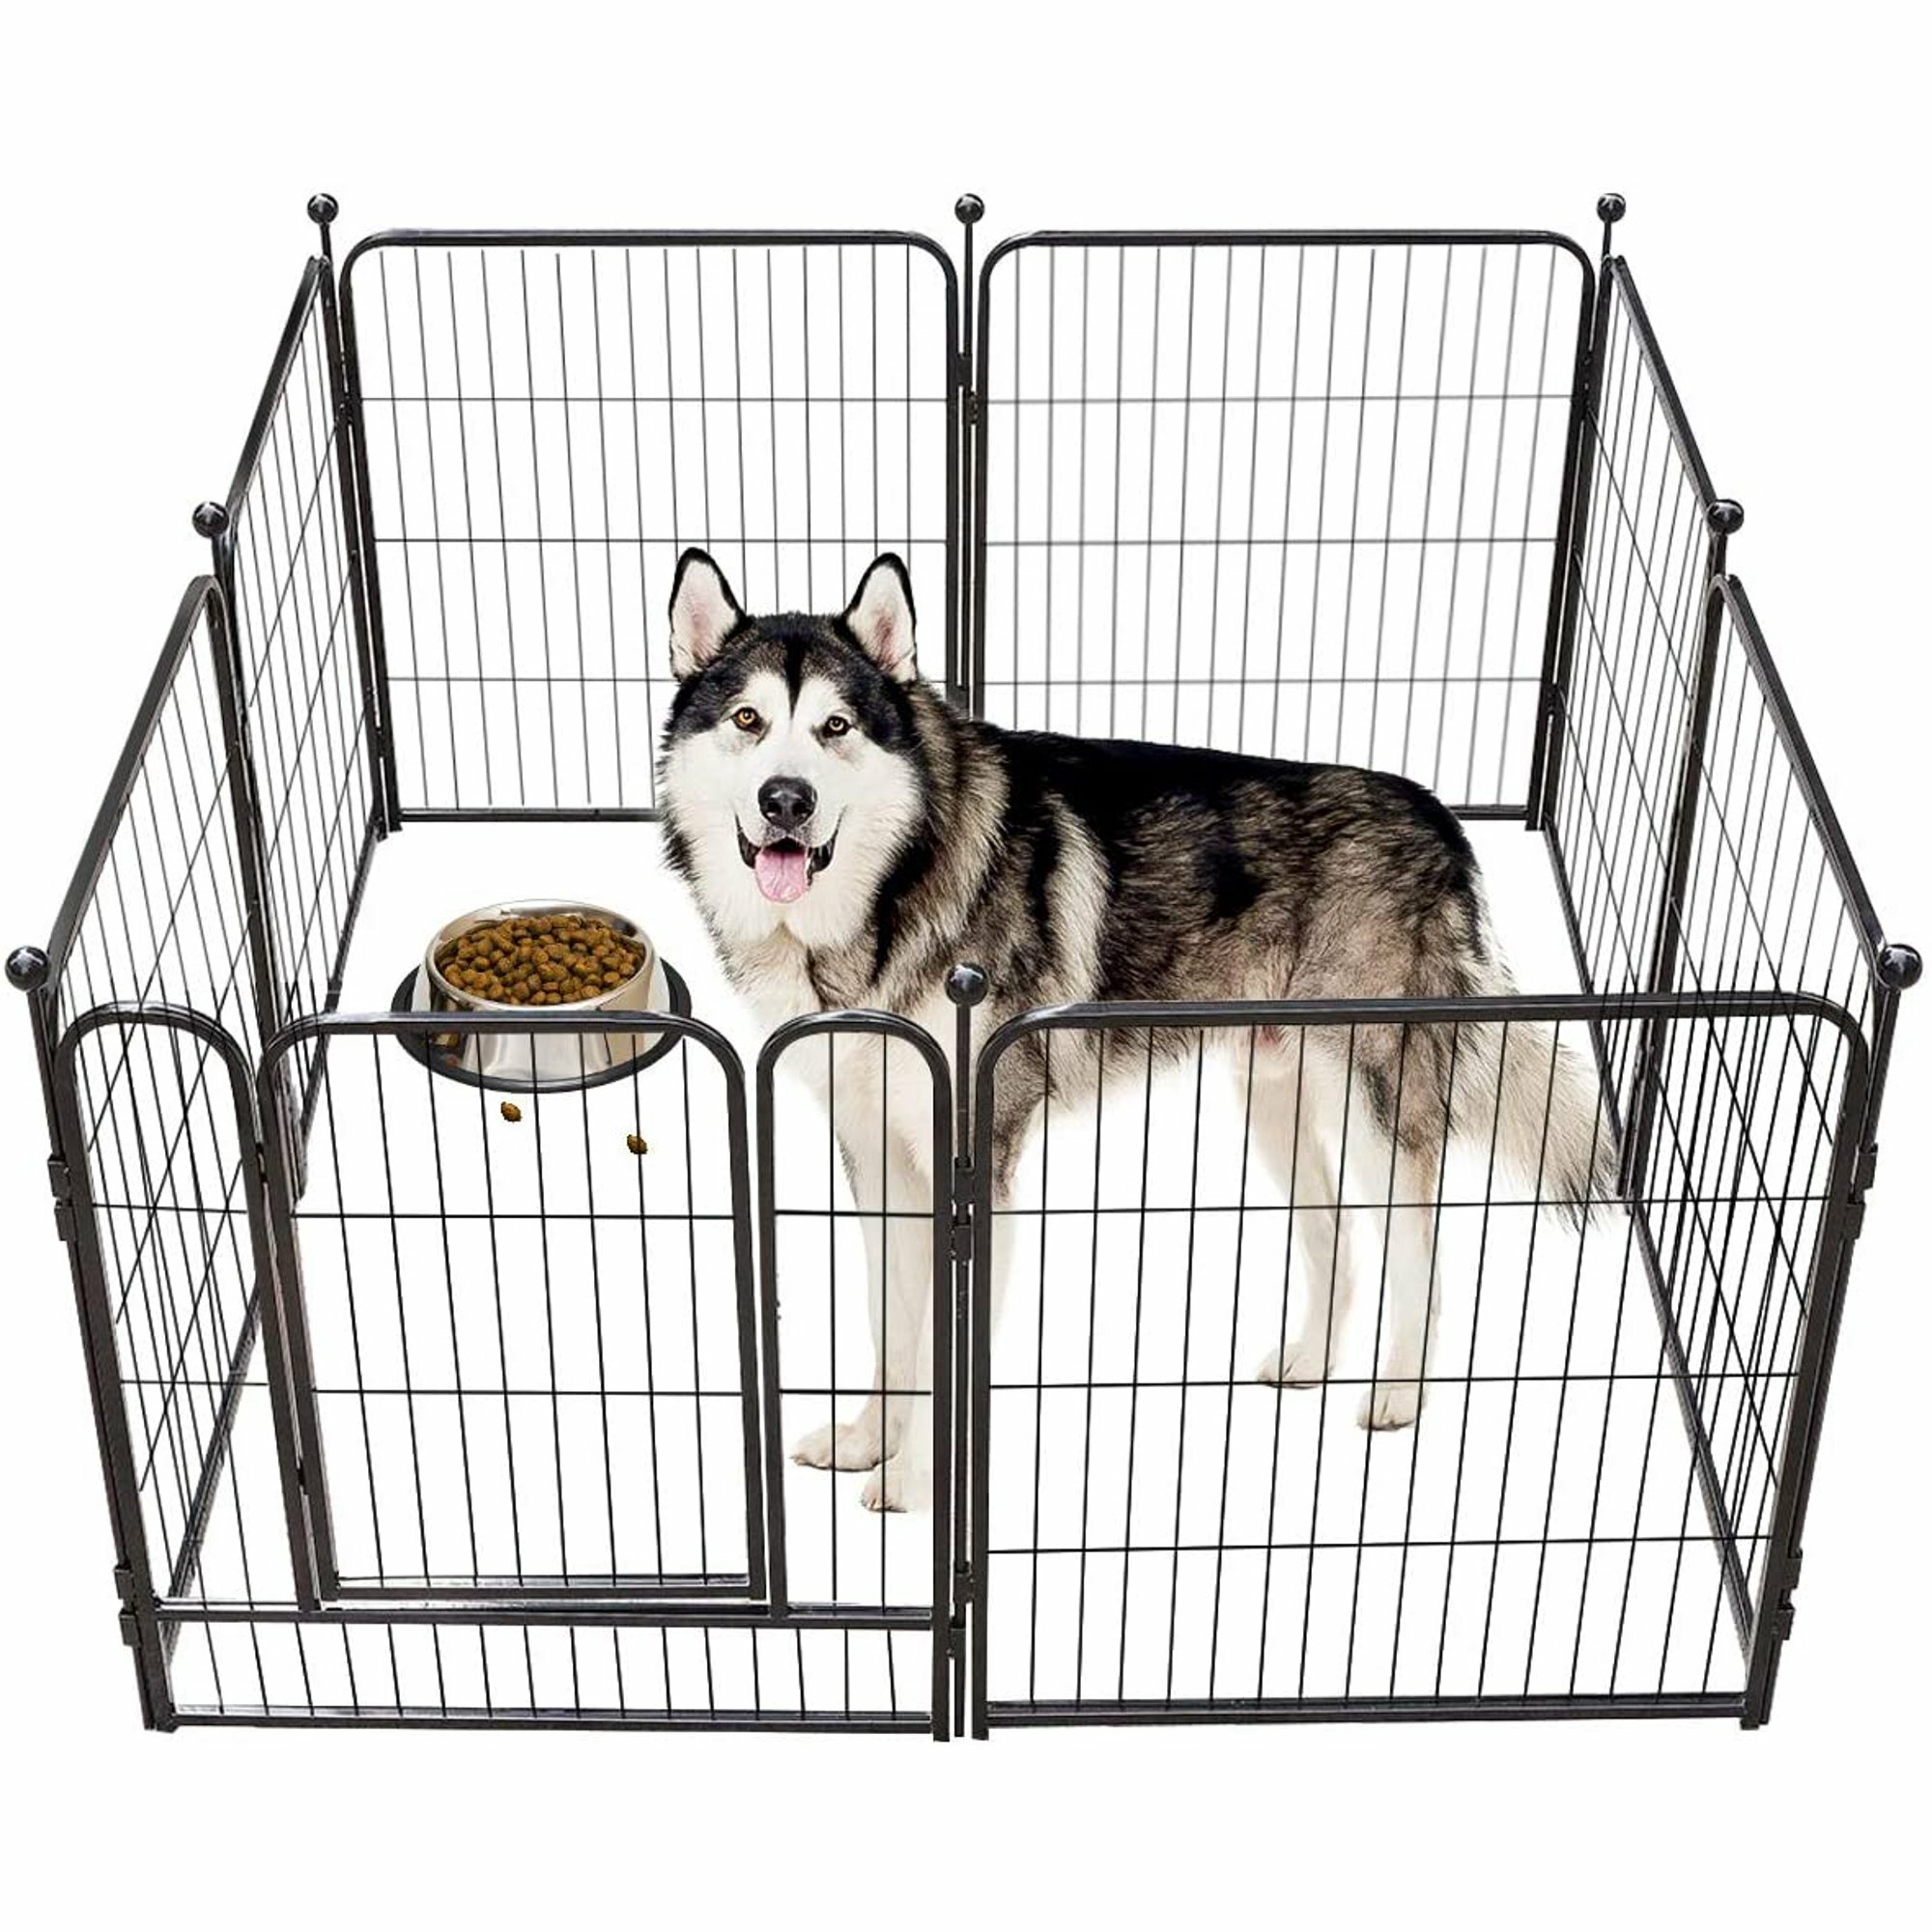  Dogs & Cats Fences Folding Metal Animal Cage Corral Suit Indoor & Outdoor Application - 8 Panels | Heyidear.com-heyidear